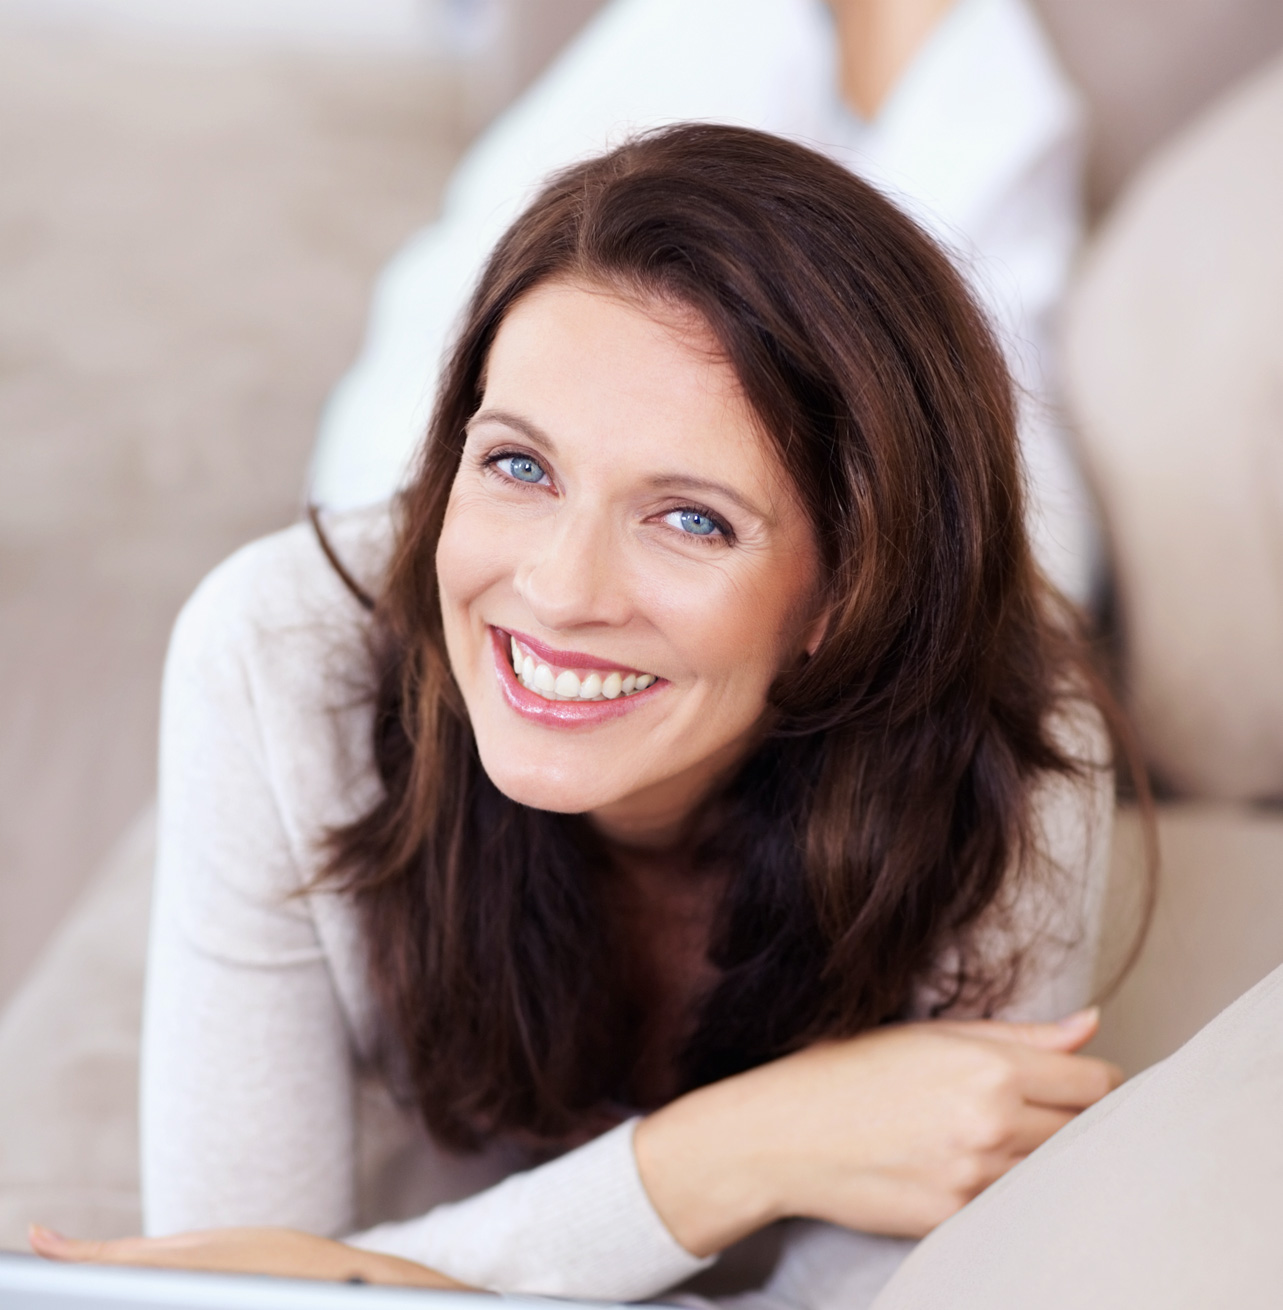 smiling brunette woman with blue eyes